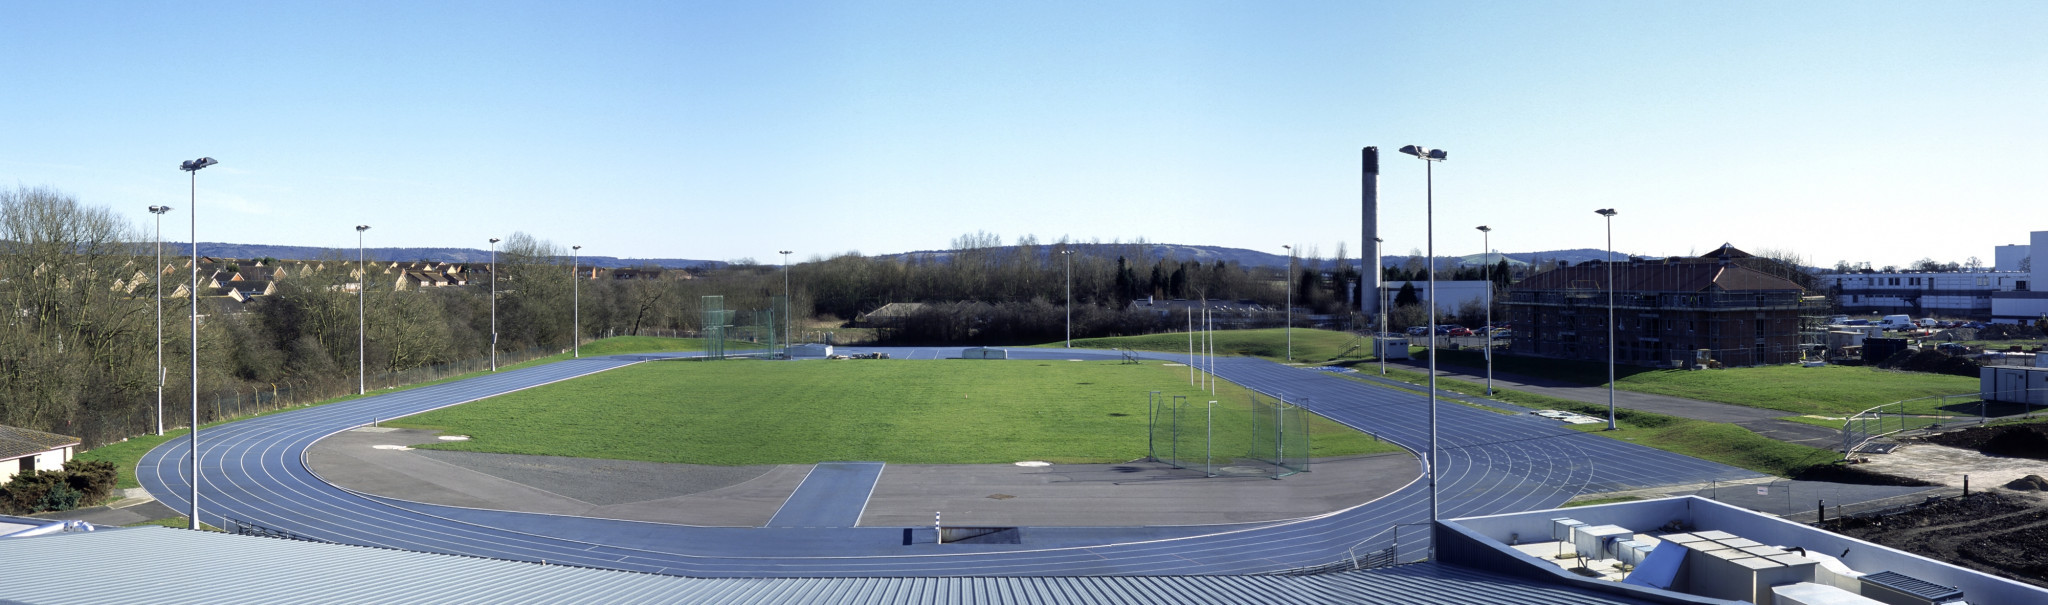 Stoke Mandeville Stadium will host a flame lighting event in preparation for the 2018 Winter Paralympics in Pyeongchang. © Stoke Mandeville Stadium